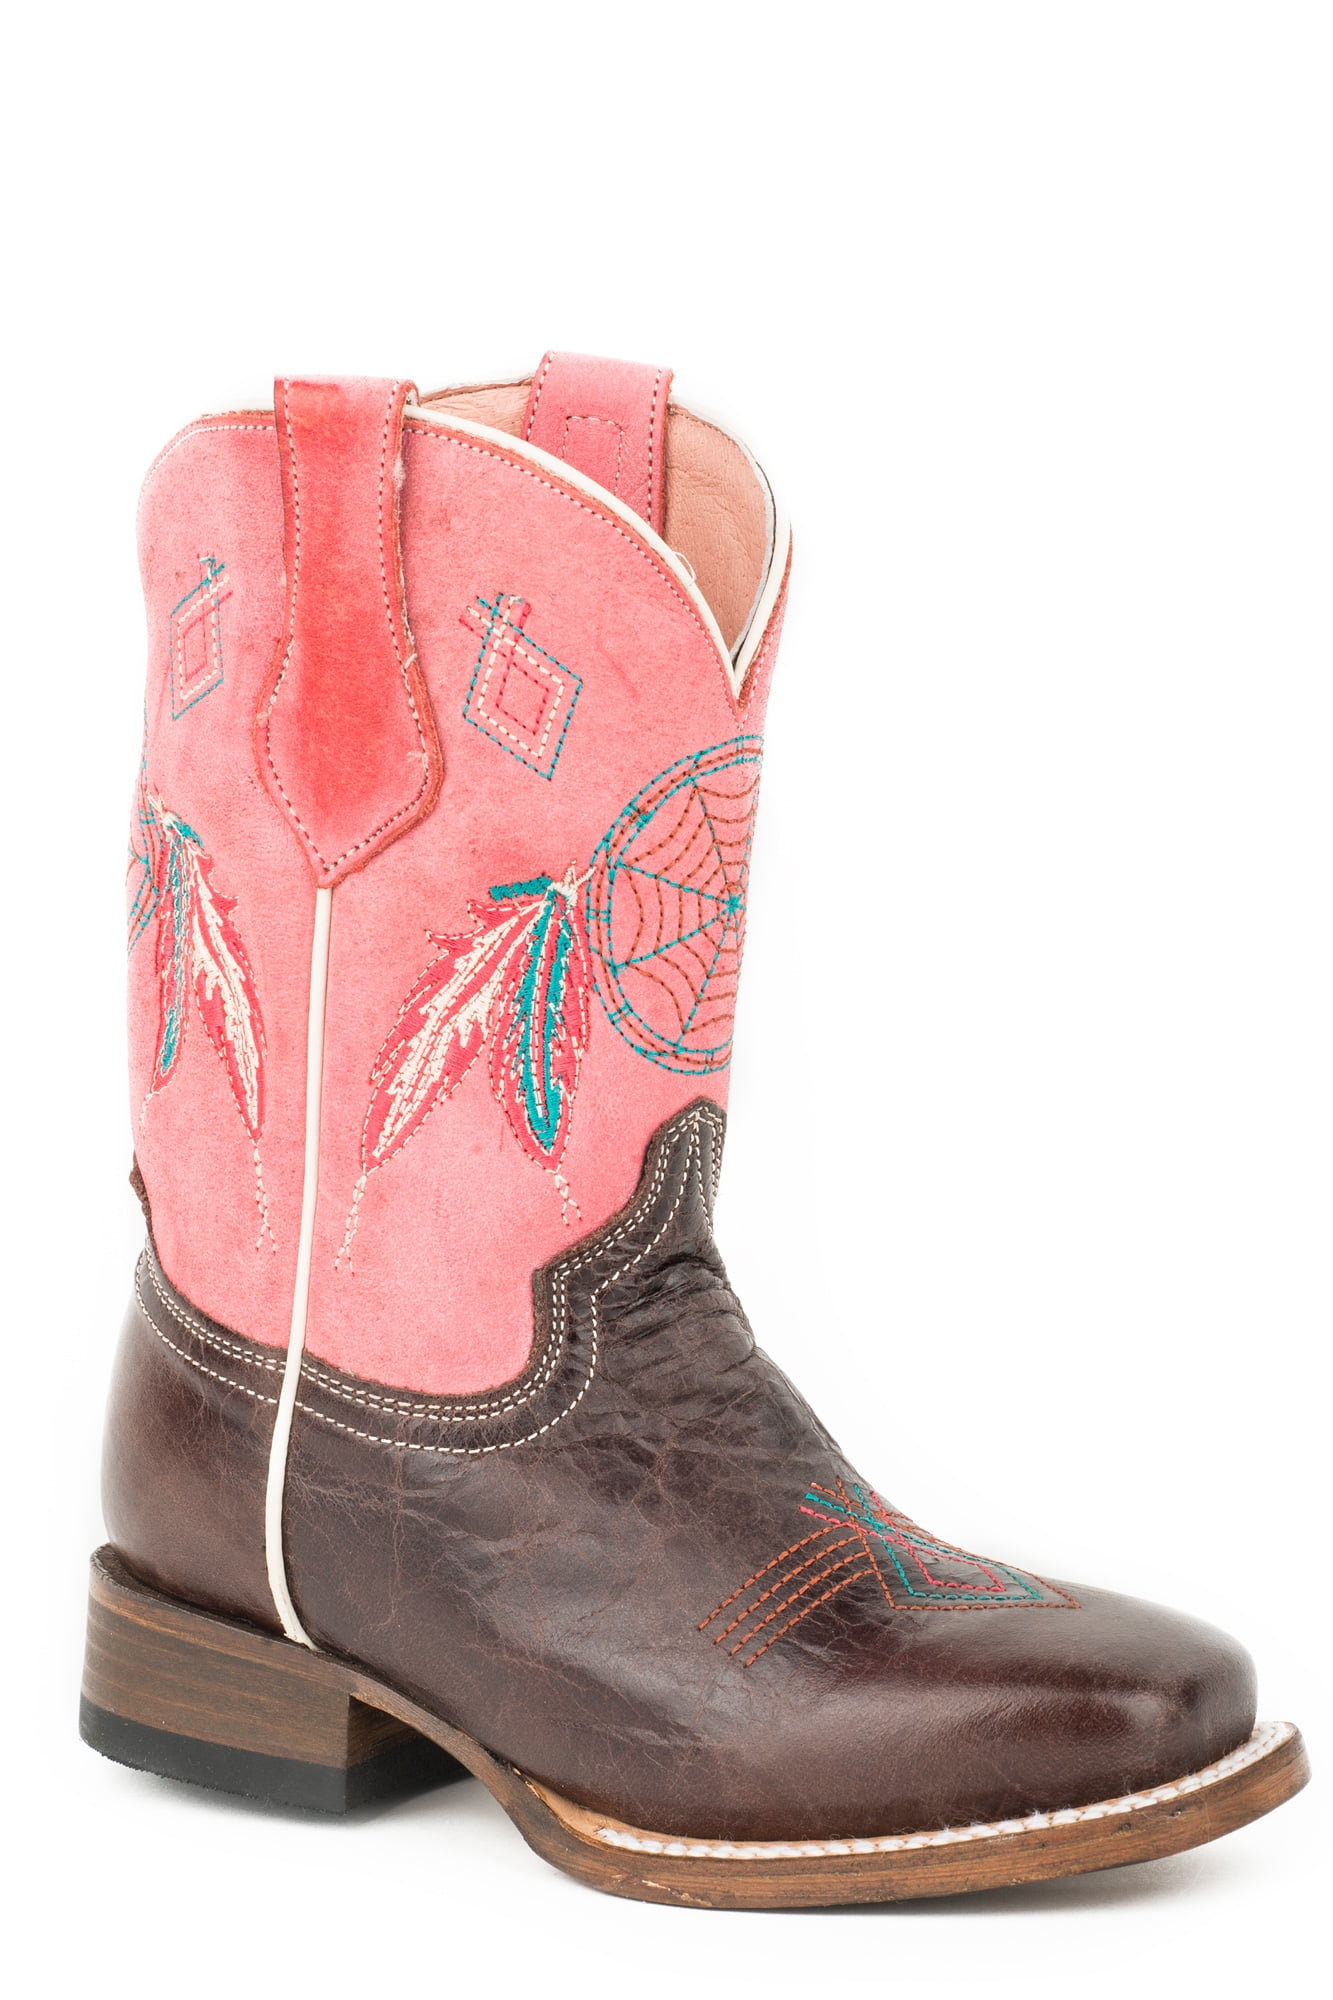 little girl red cowboy boots